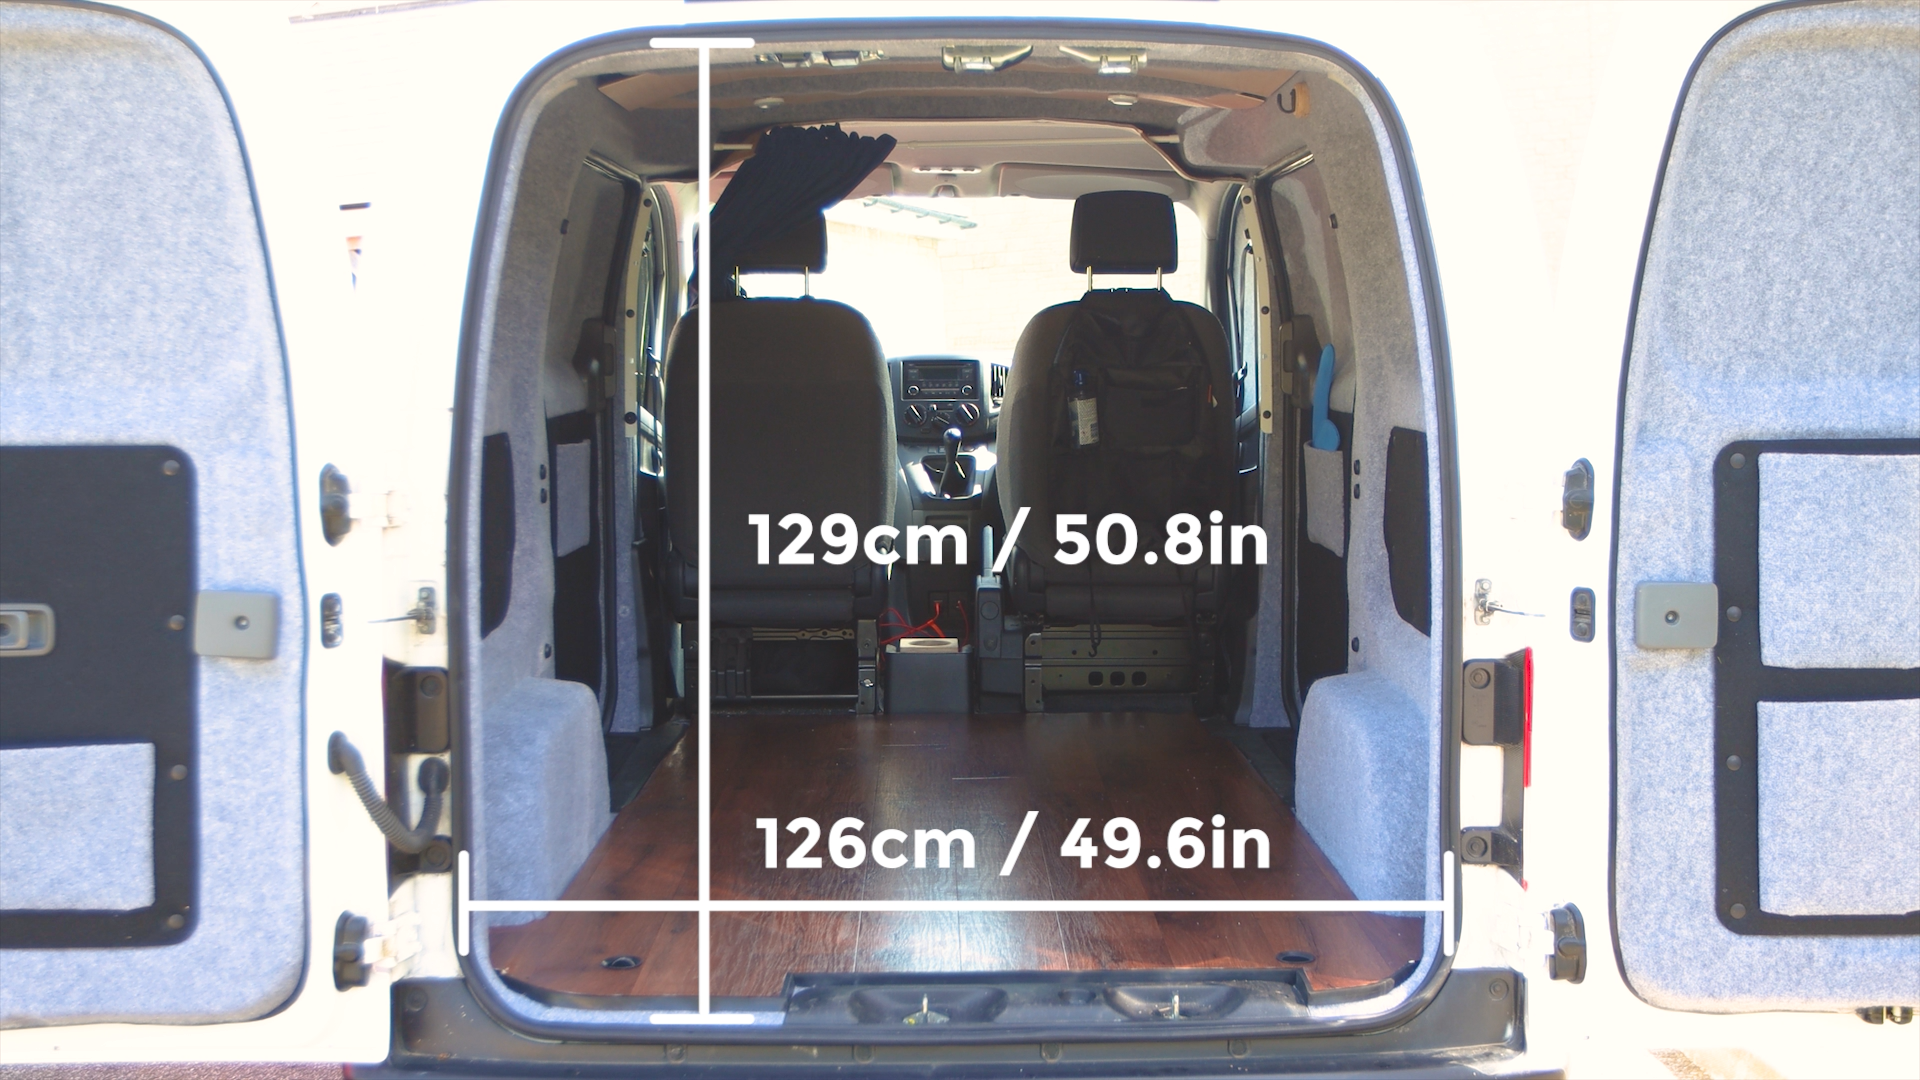 Full Dimensions For Converting An Nissan NV200 – The Tiny Camper Van